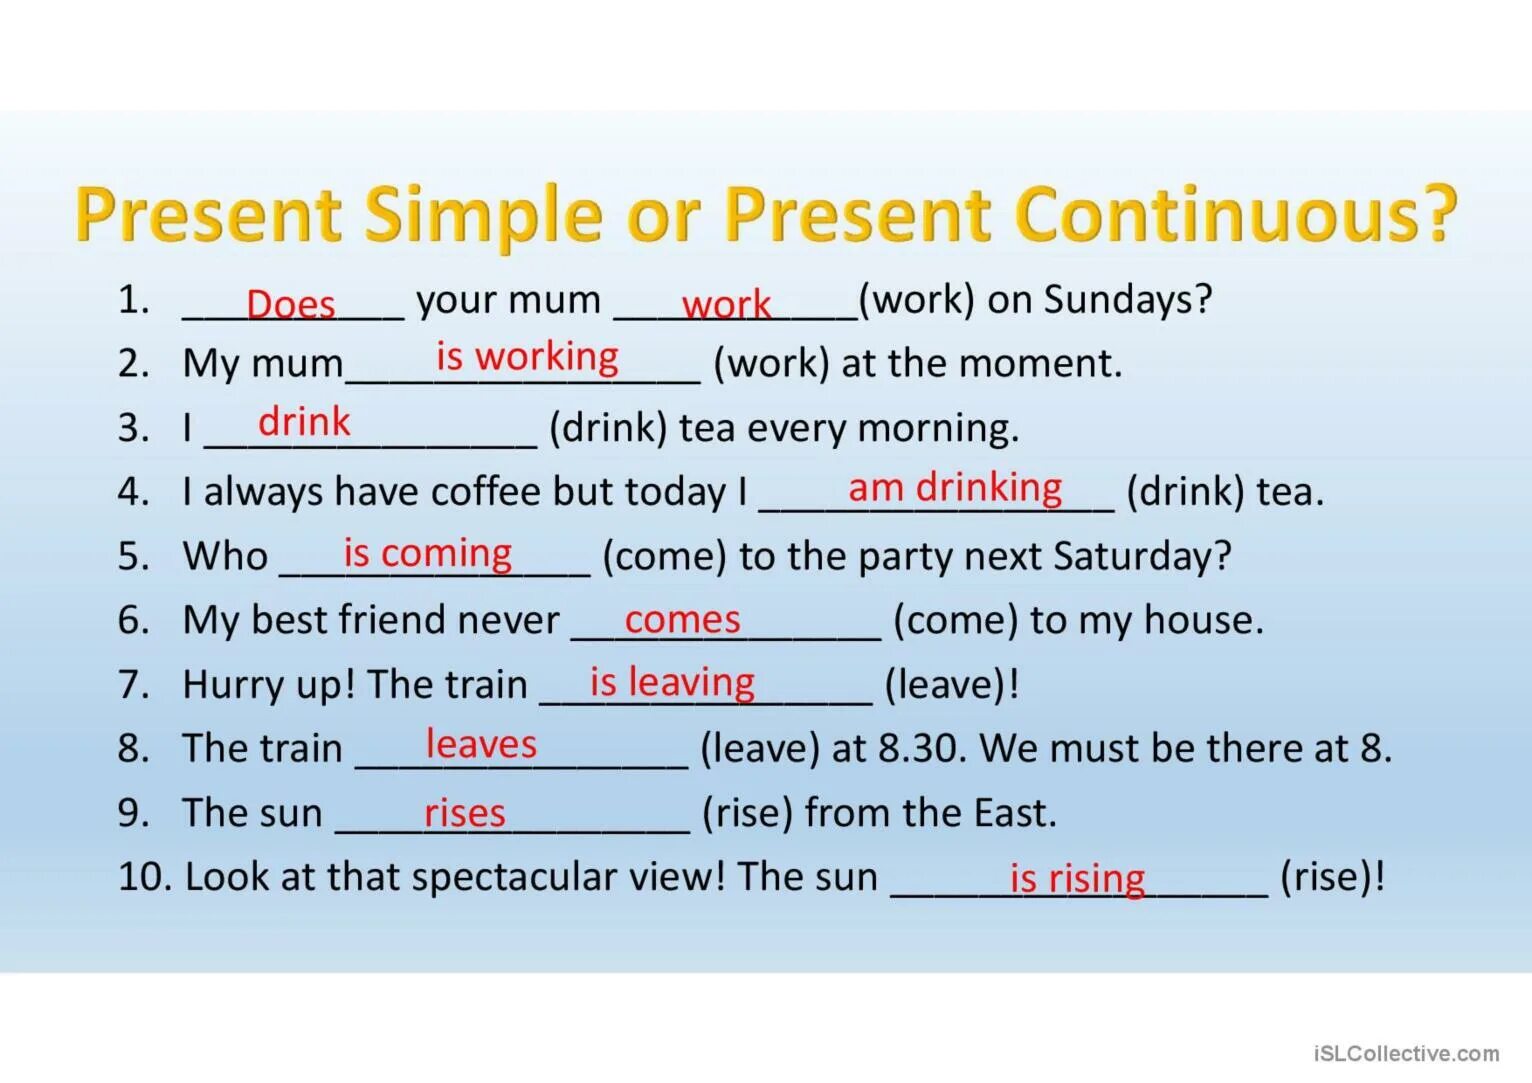 Wordwall present continuous past continuous. Present simple Tense present Continuous Tense. Present simple present Continuous разница. Present simple with present Continuous. Present simple vs present Continuous vs past simple Worksheets.